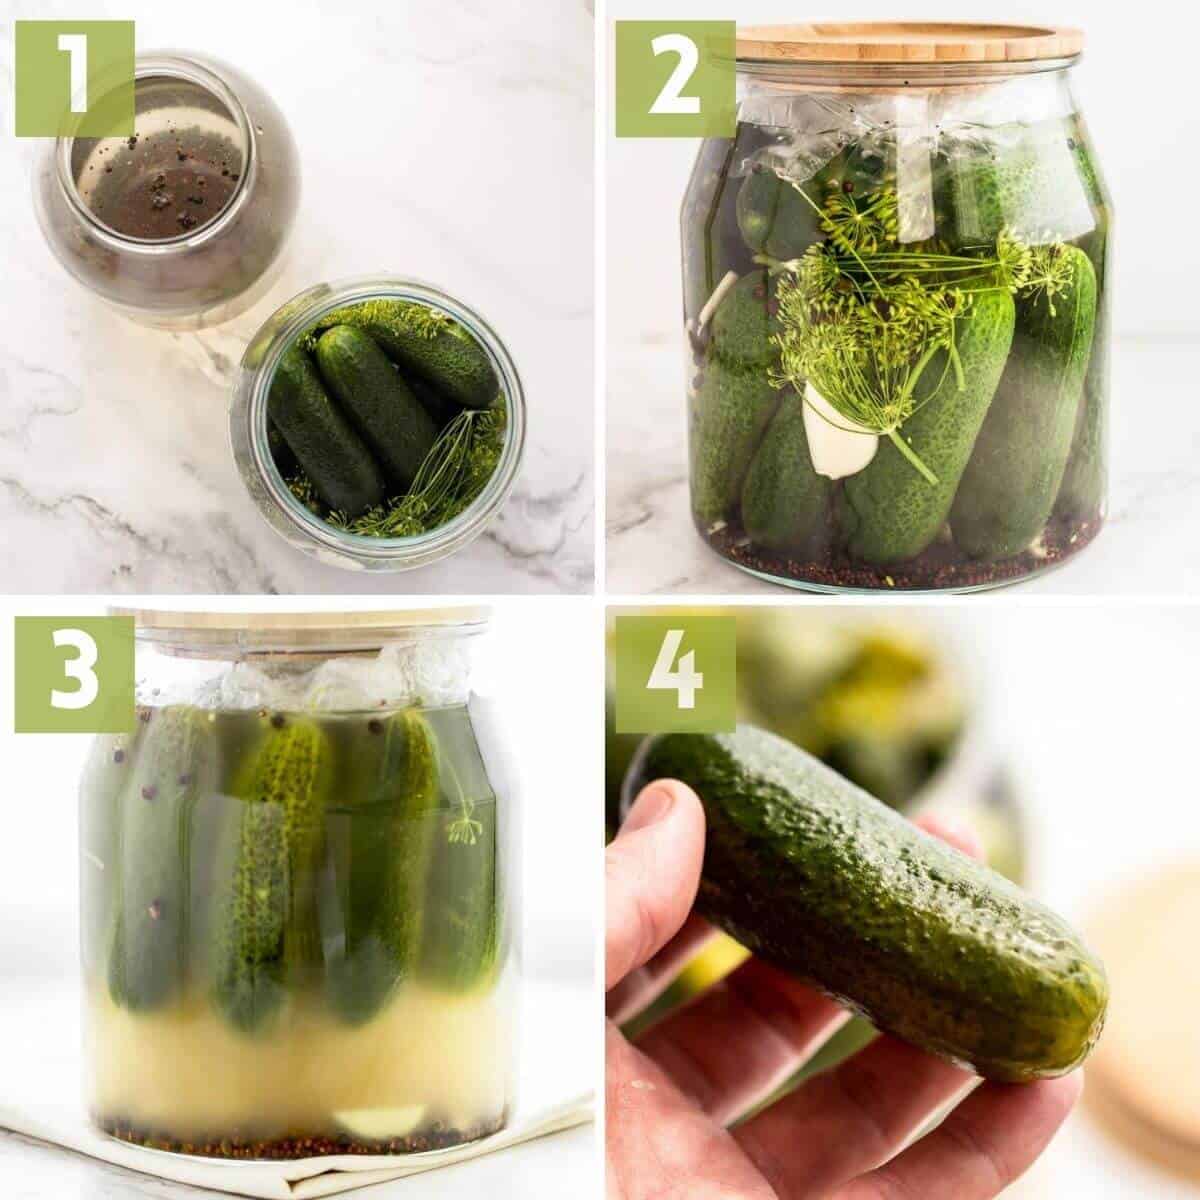 Steps for pickling cucumbers.